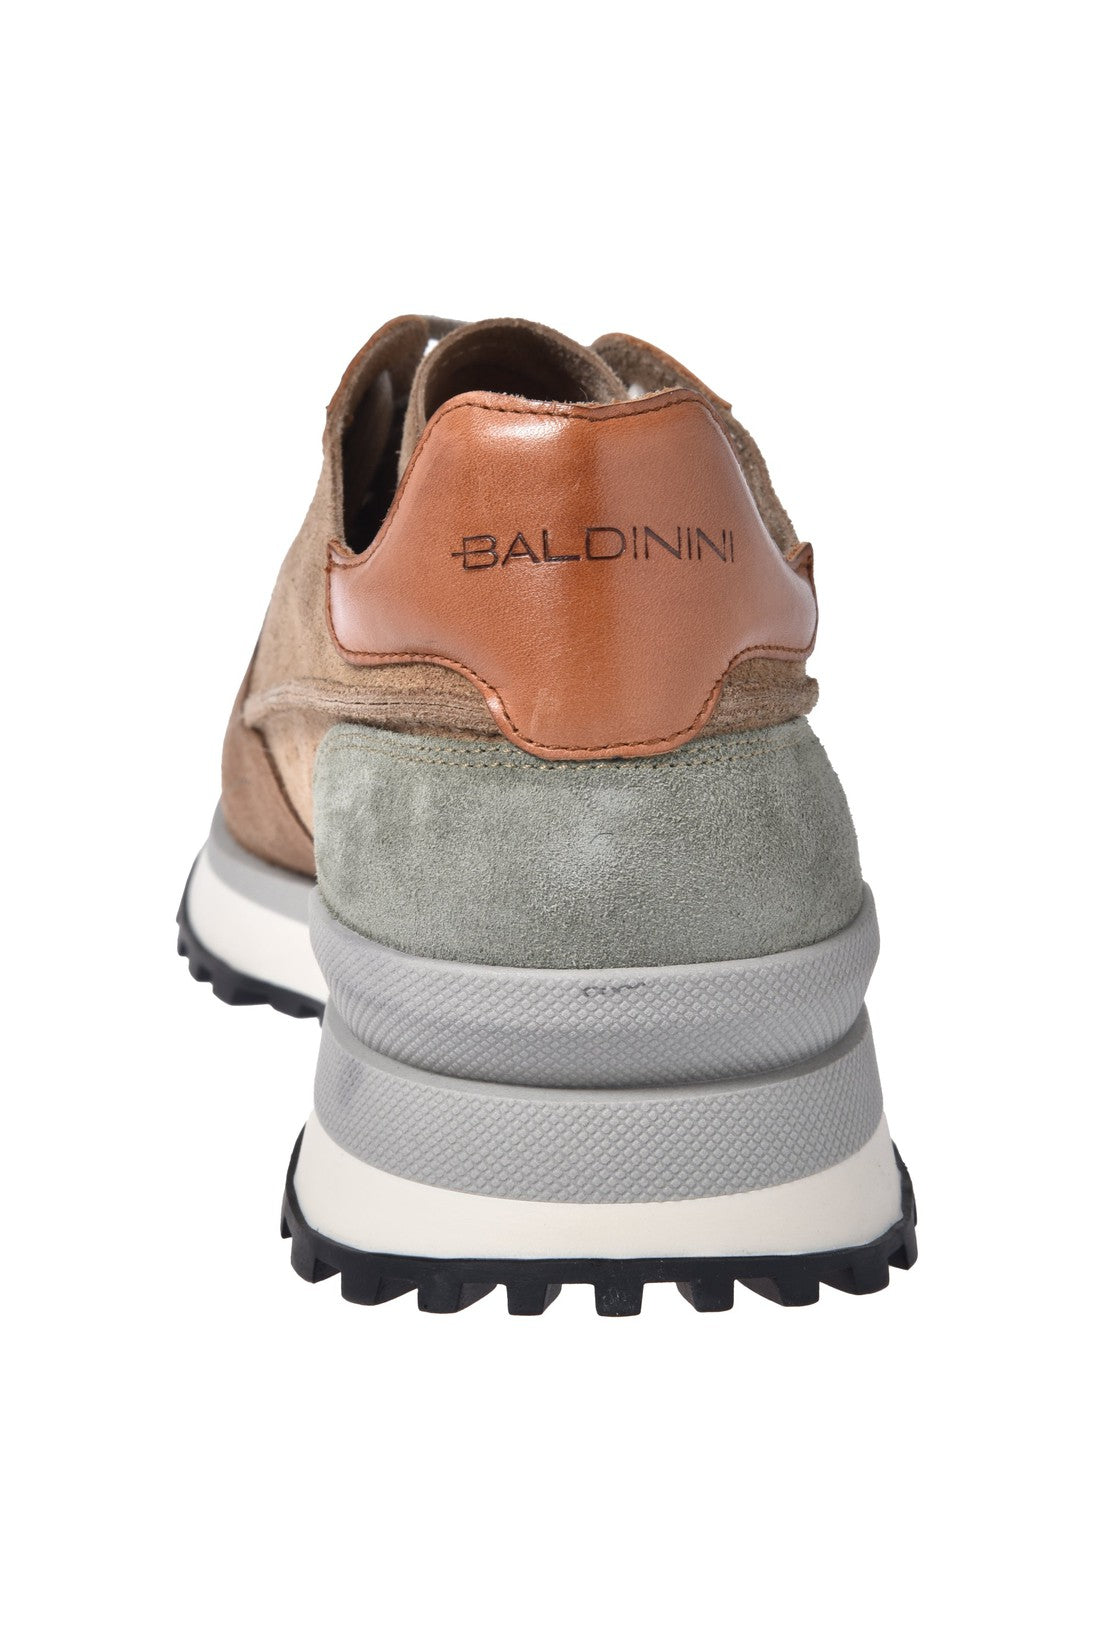 Sneaker in taupe and beige suede leather